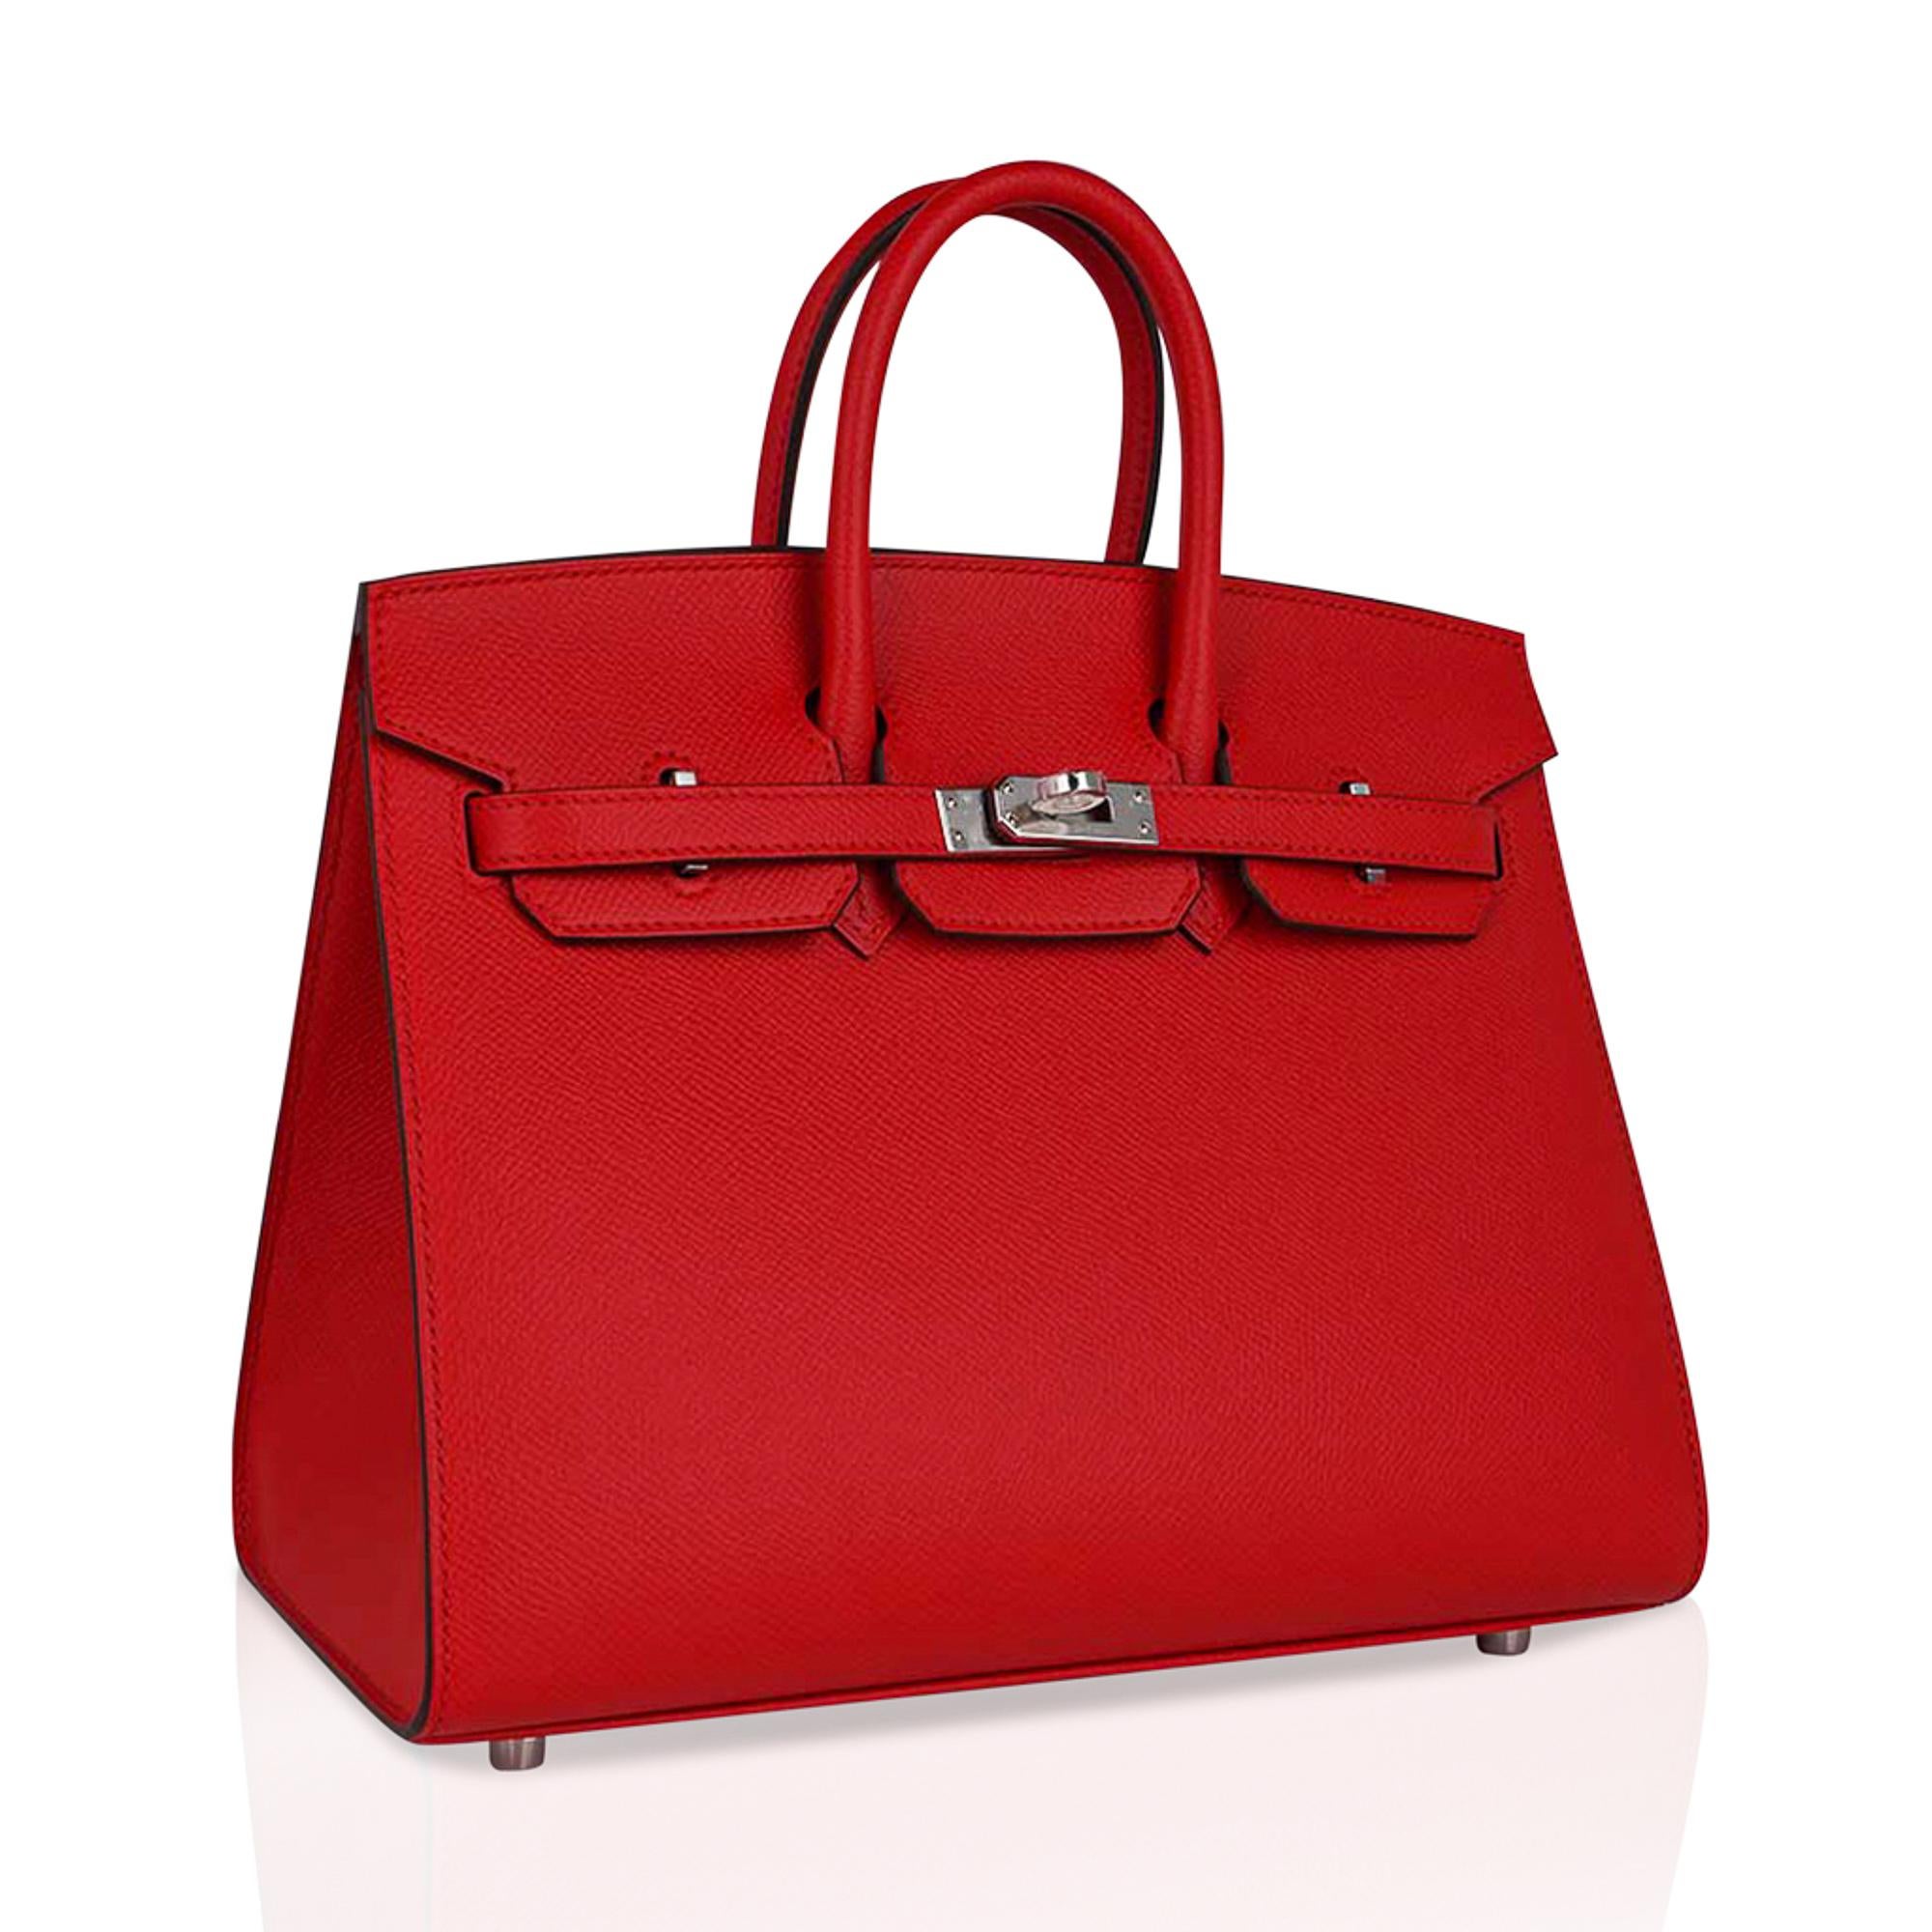 Mightychic offers an Hermes Birkin Sellier 25 bag featured in vibrant Rouge De Couer.
This striking Hermes red is richly saturated and gorgeous for year round wear.
Fresh with Palladium hardware.
This exquisite bag is modern and minimalist.
A sleek